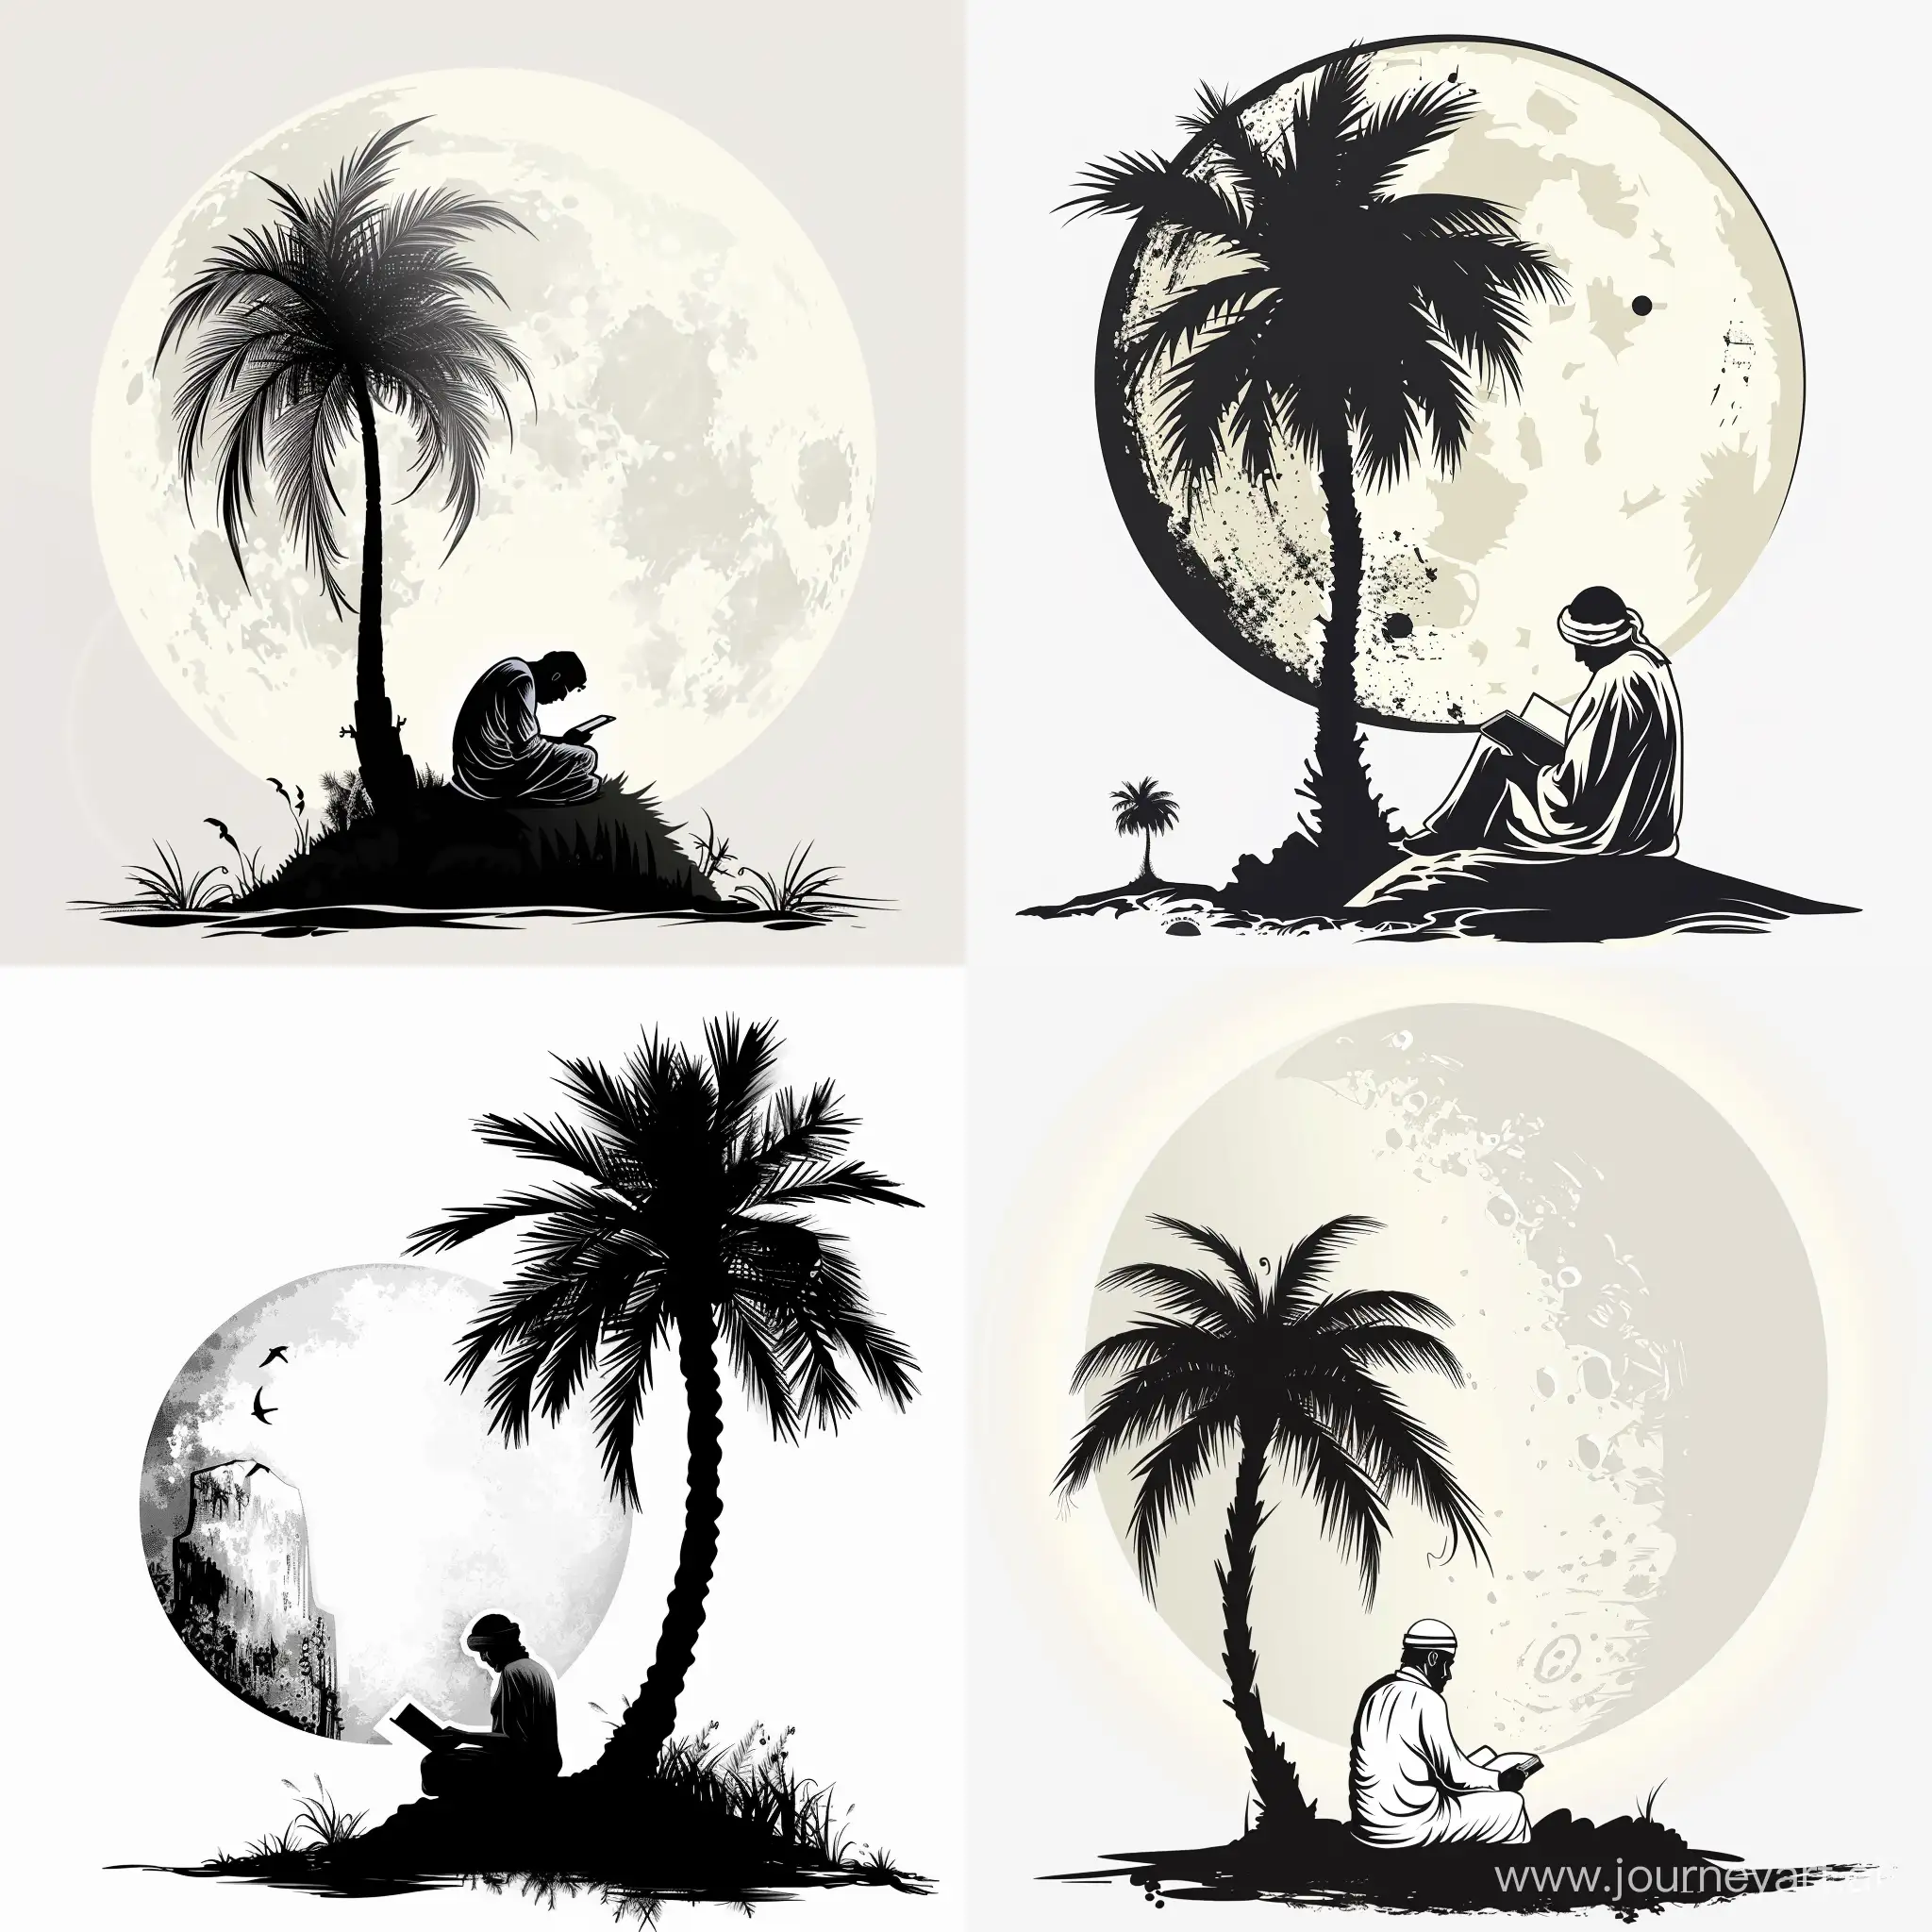 Make a simple about a Middle Eastern Bedouin man reading a book and leaning his back on a palm tree in the middle of an oasis. Make the background white with a big moon the man, the oasis and palm tree black